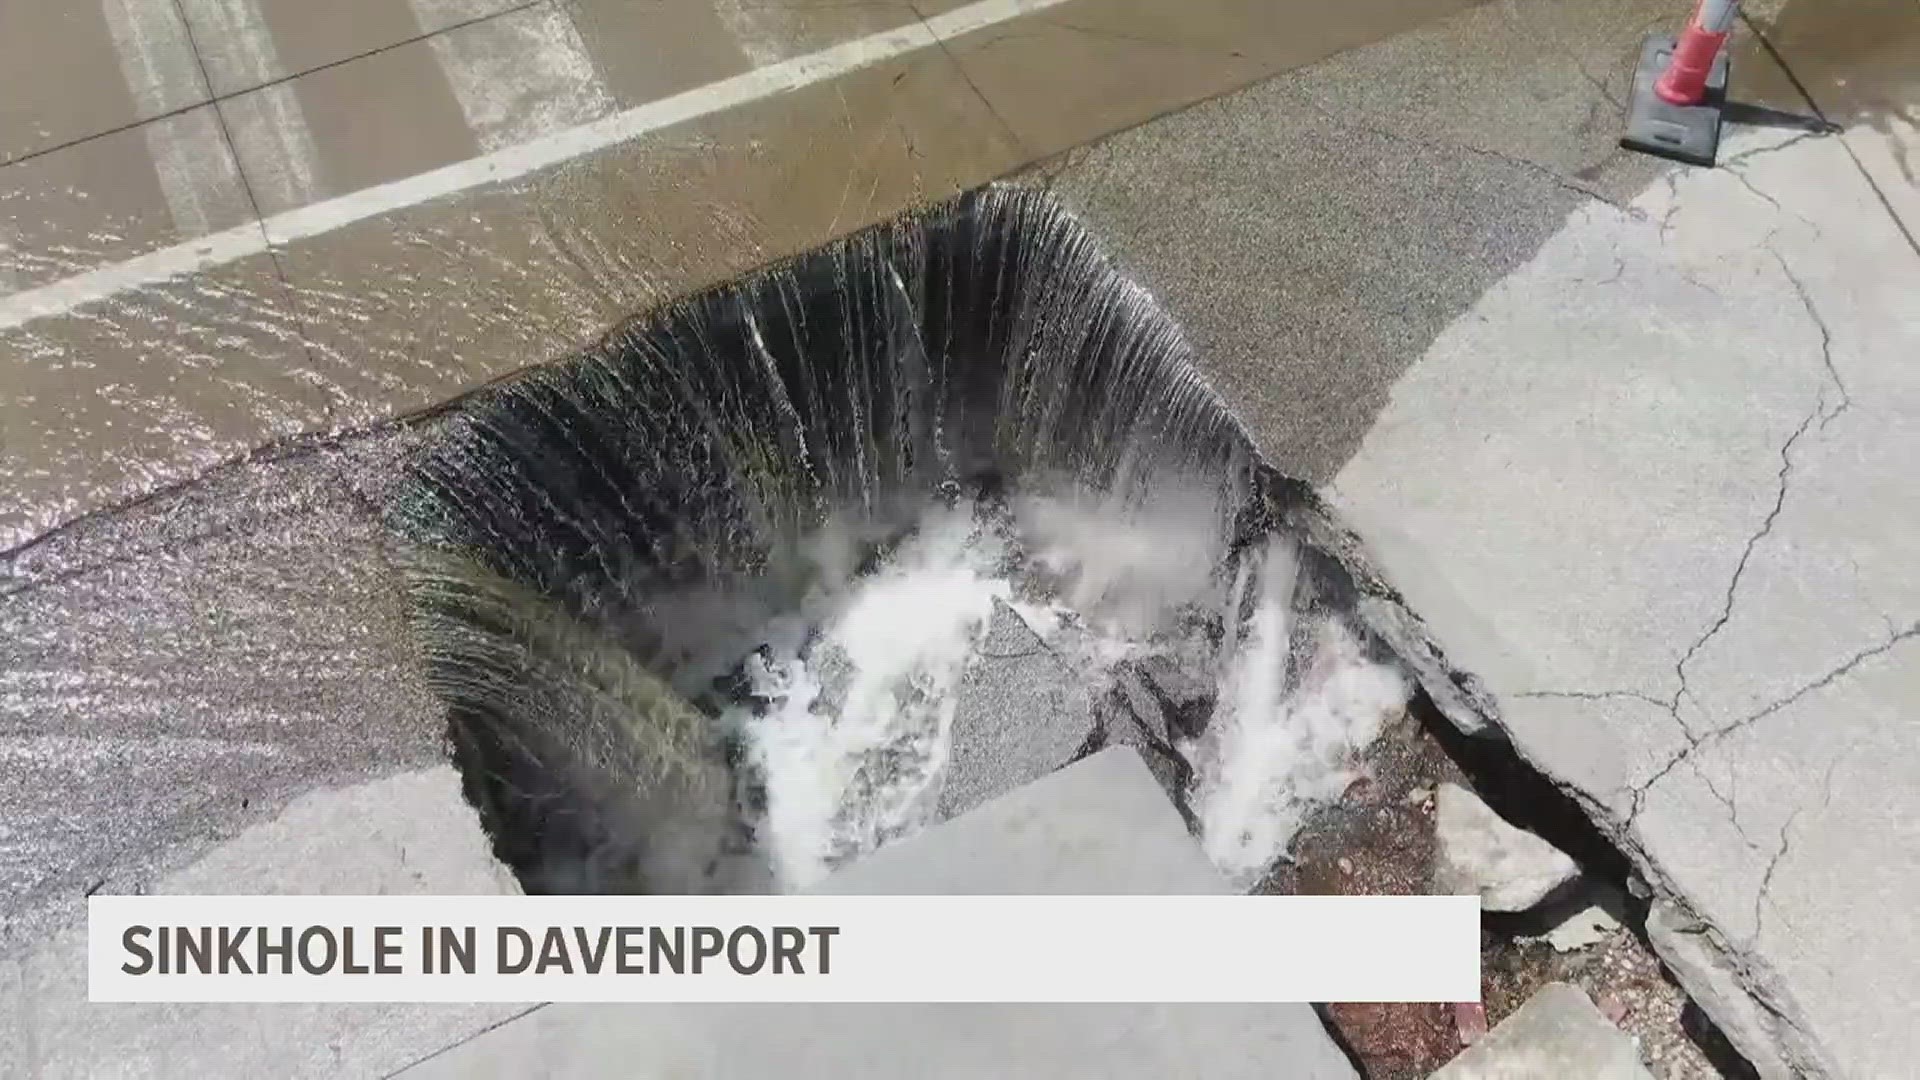 This sinkhole popped up near Quinlan Court in Davenport as flood waters receded back into the Mississippi River on Wednesday.